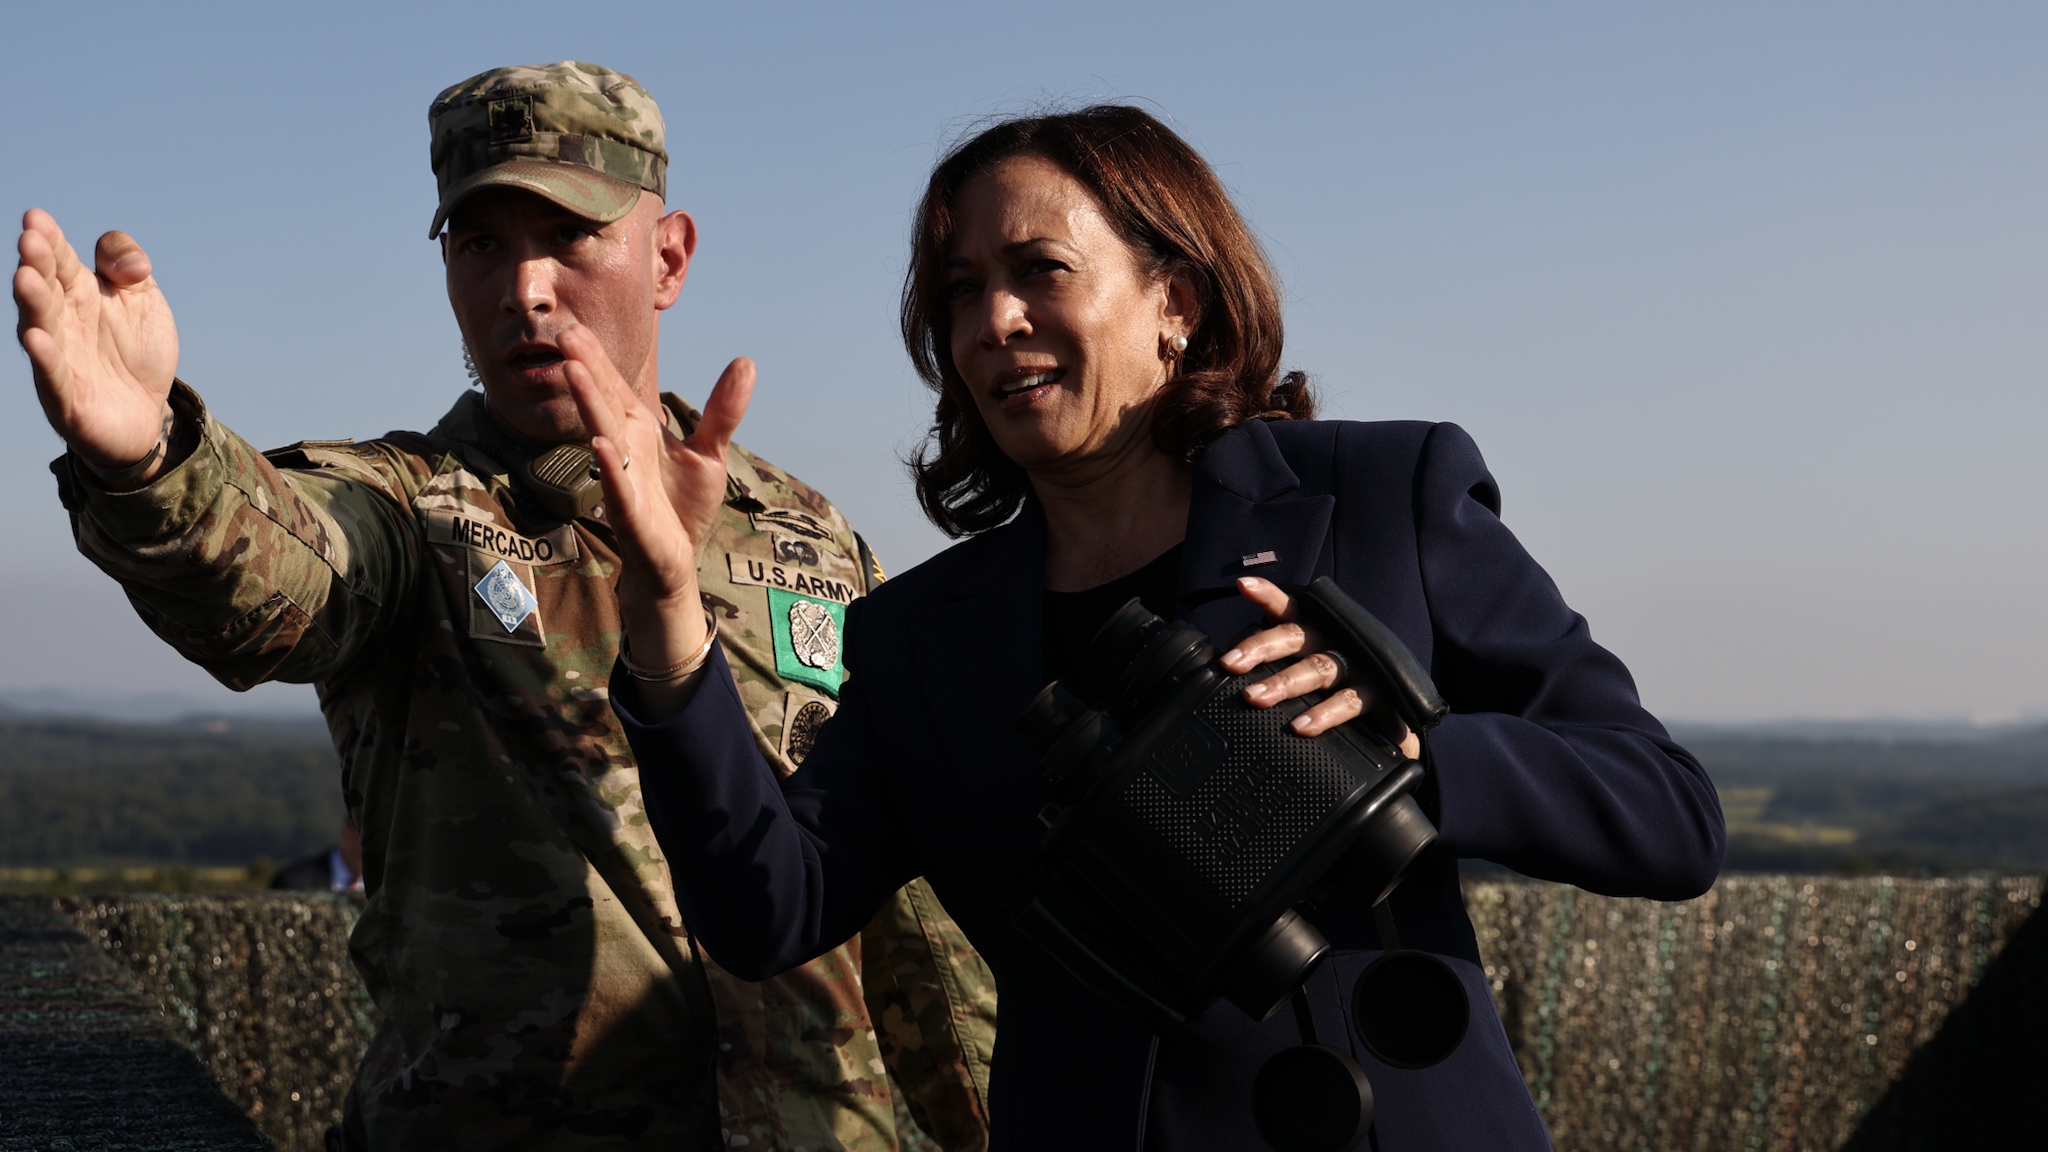 US Vice President Kamala Harris, right, looks towards the north side of the border at the Demilitarized Zone (DMZ) in Paju, South Korea, on Thursday, Sept. 29, 2022. Harris and South Korea President Yoon Suk Yeol condemned North Koreas ballistic missile launches and discussed response to potential future provocations, according to a White House readout of the meeting between the two leaders.